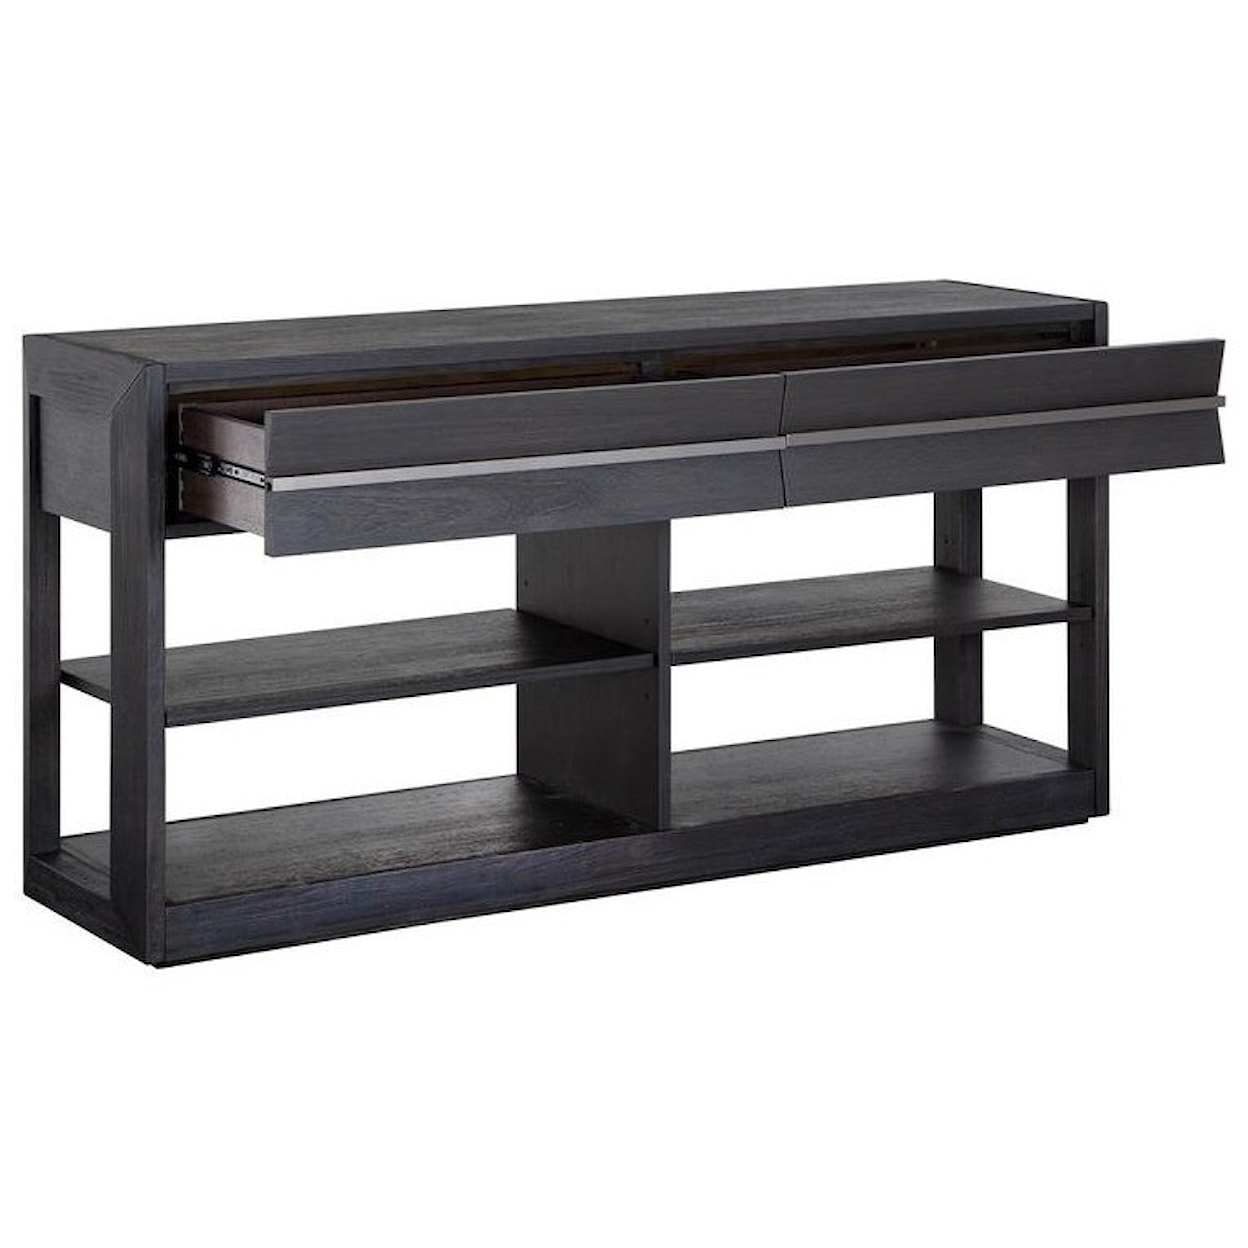 Magnussen Home Wentworth Village Bedroom Console Sofa Table